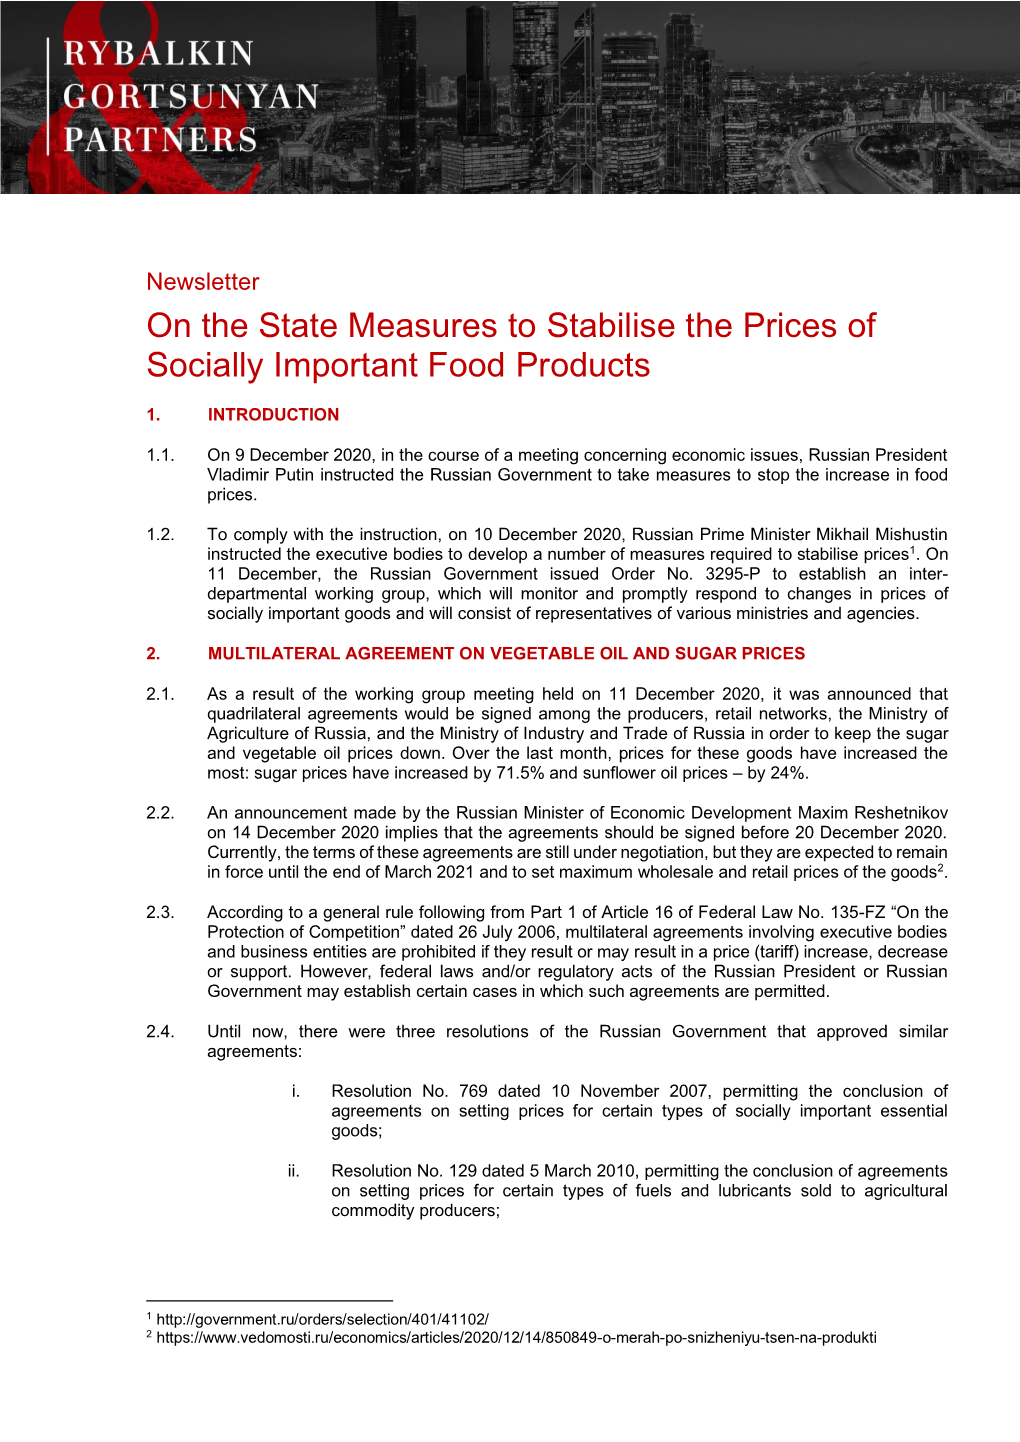 On the State Measures to Stabilise the Prices of Socially Important Food